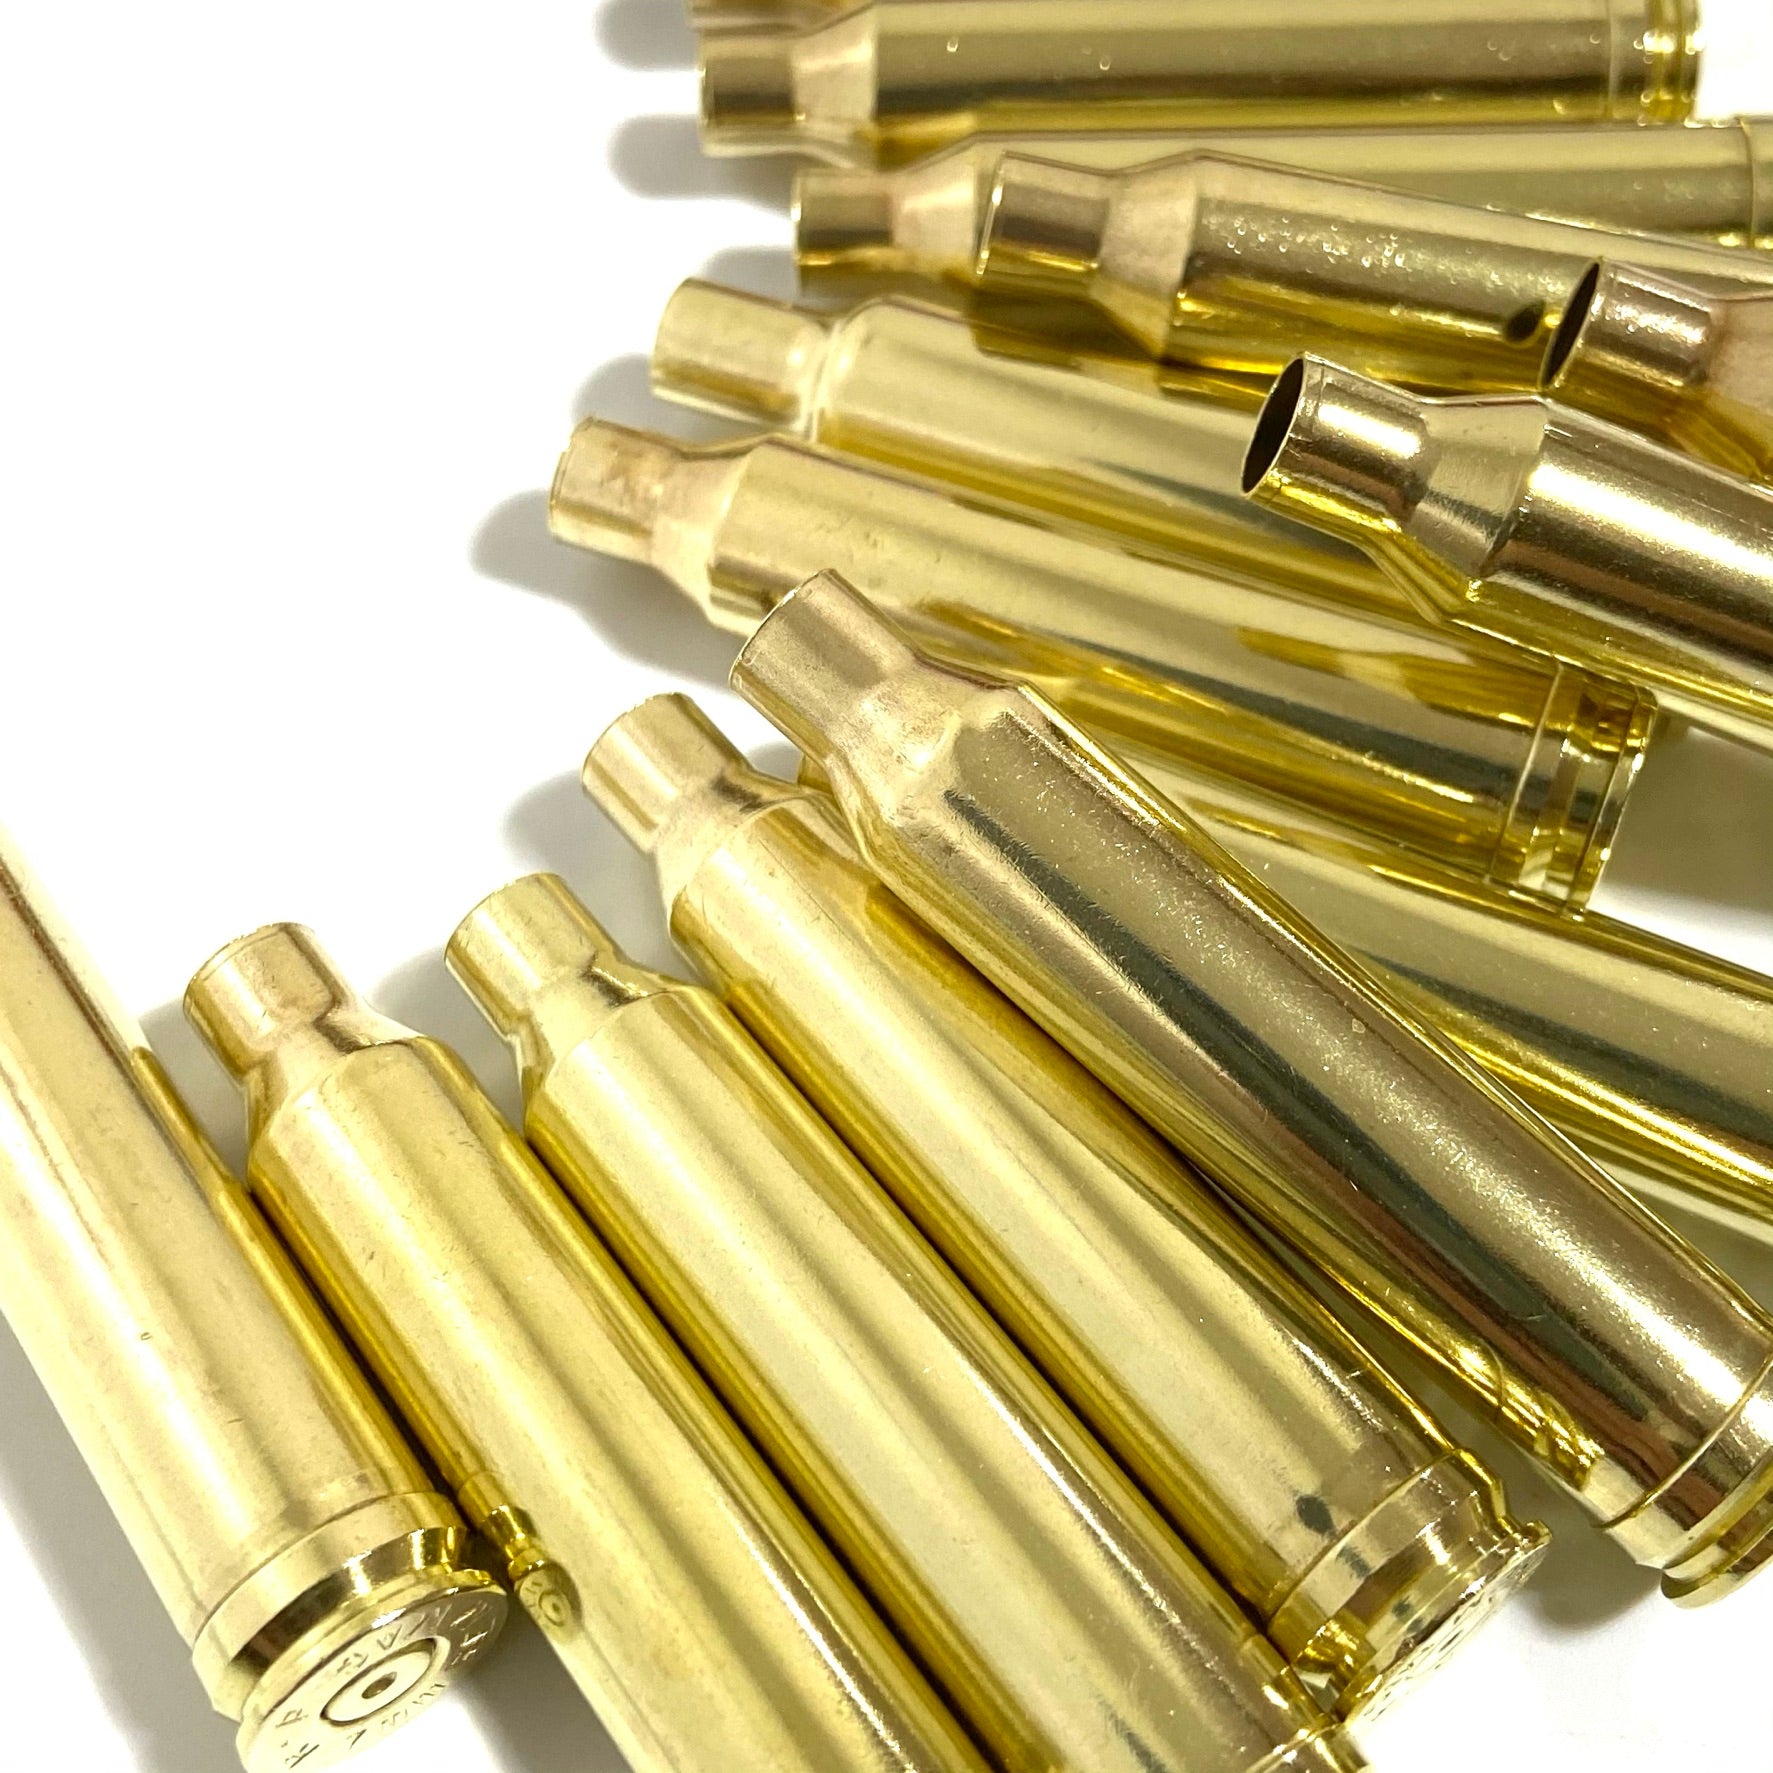 7MM Remington Magnum Once Fired Empty Spent Brass Casings Polished